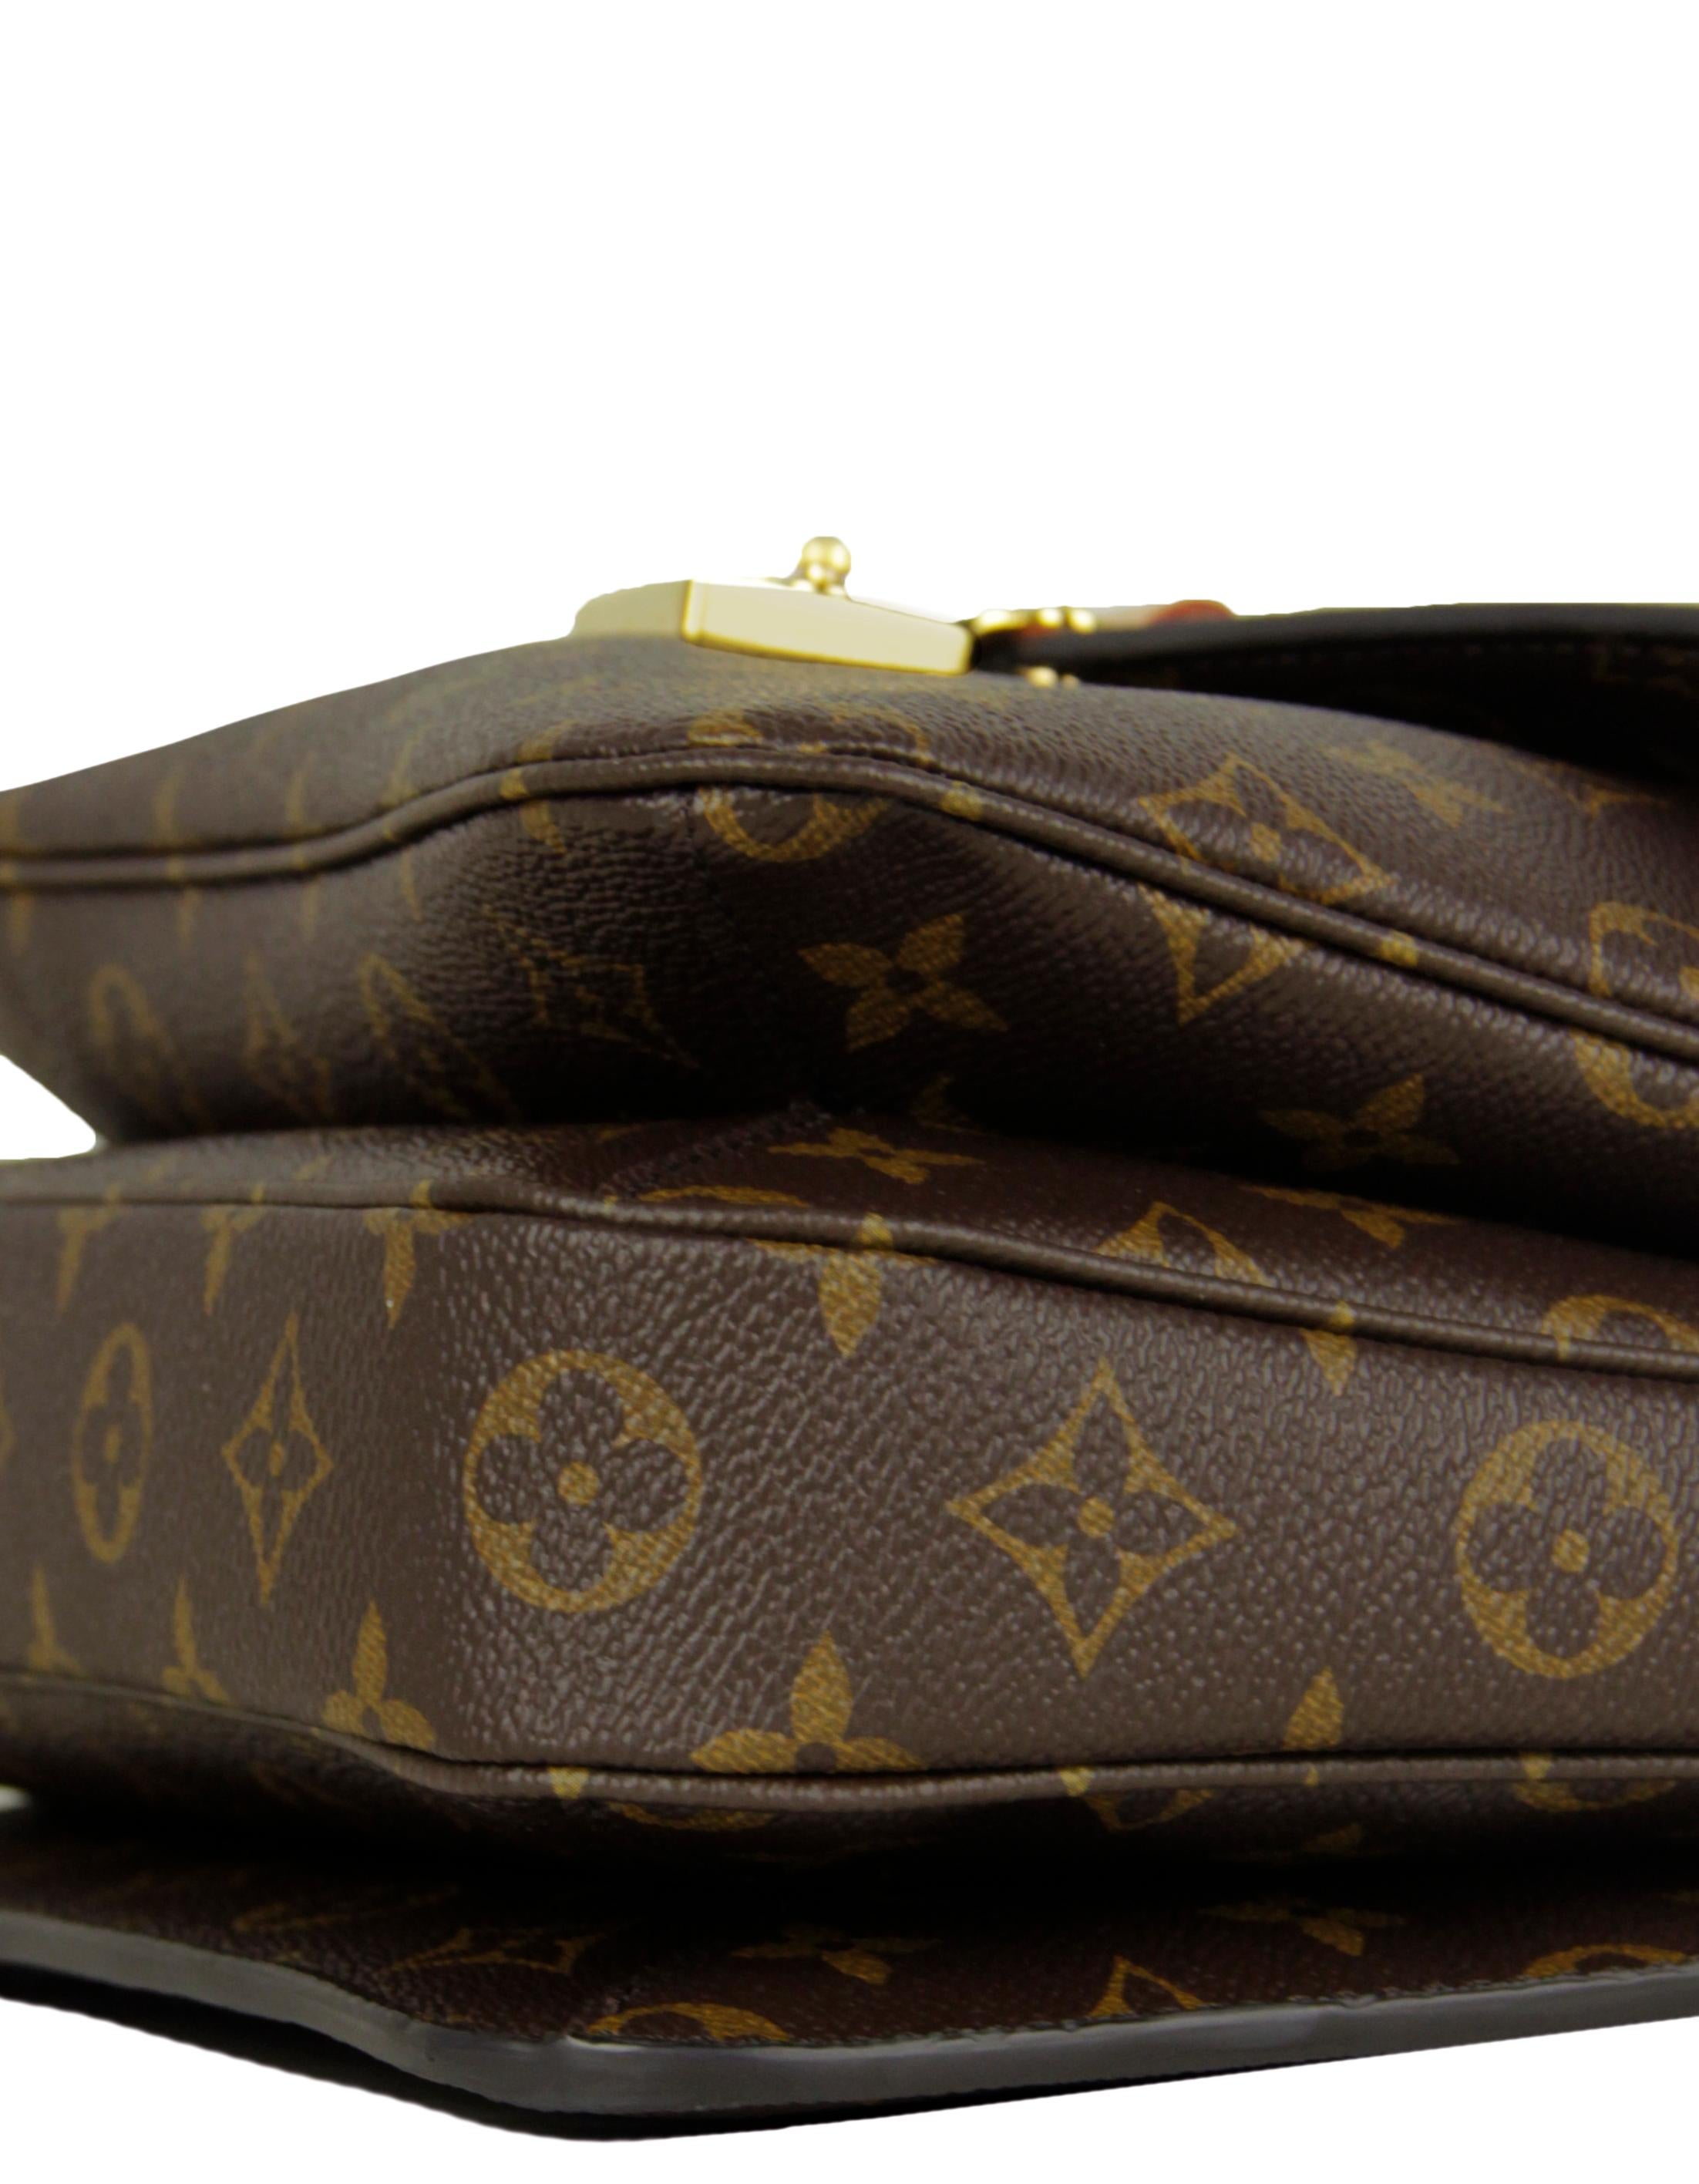 Louis Vuitton Monogram Pochette Metis Messenger Bag In Excellent Condition For Sale In New York, NY